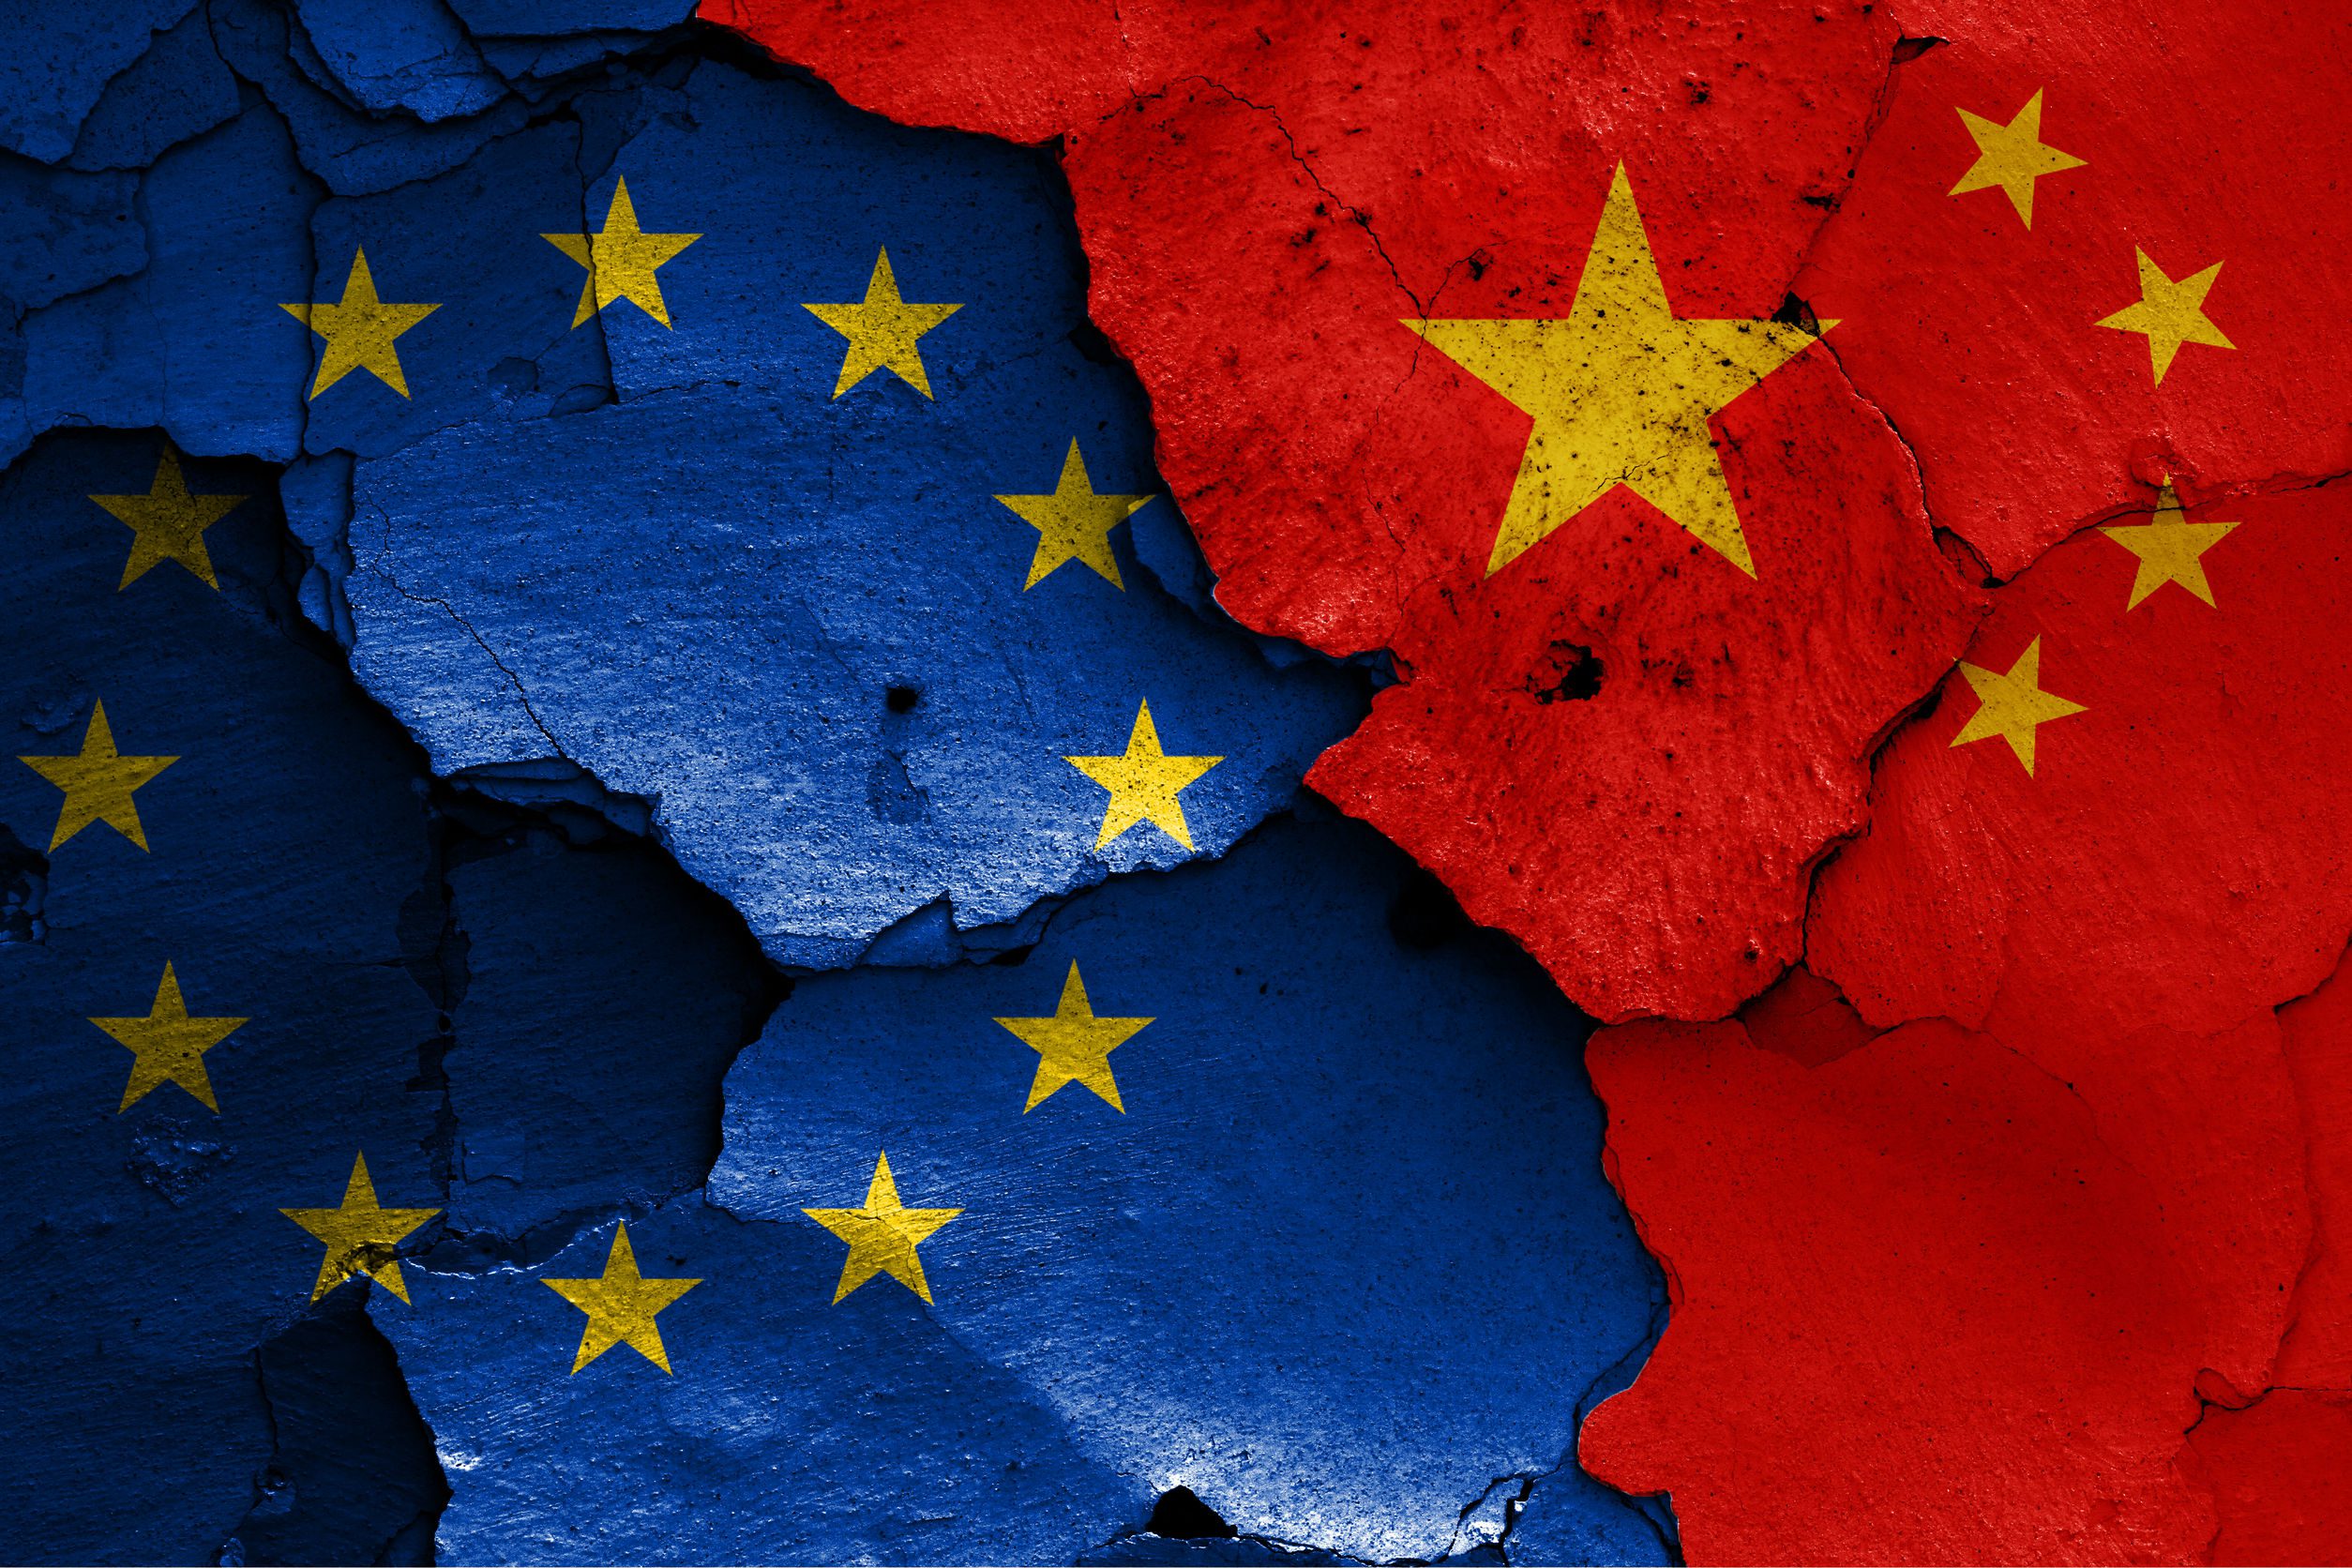 Europe Fights Back to Curb China’s Dominance